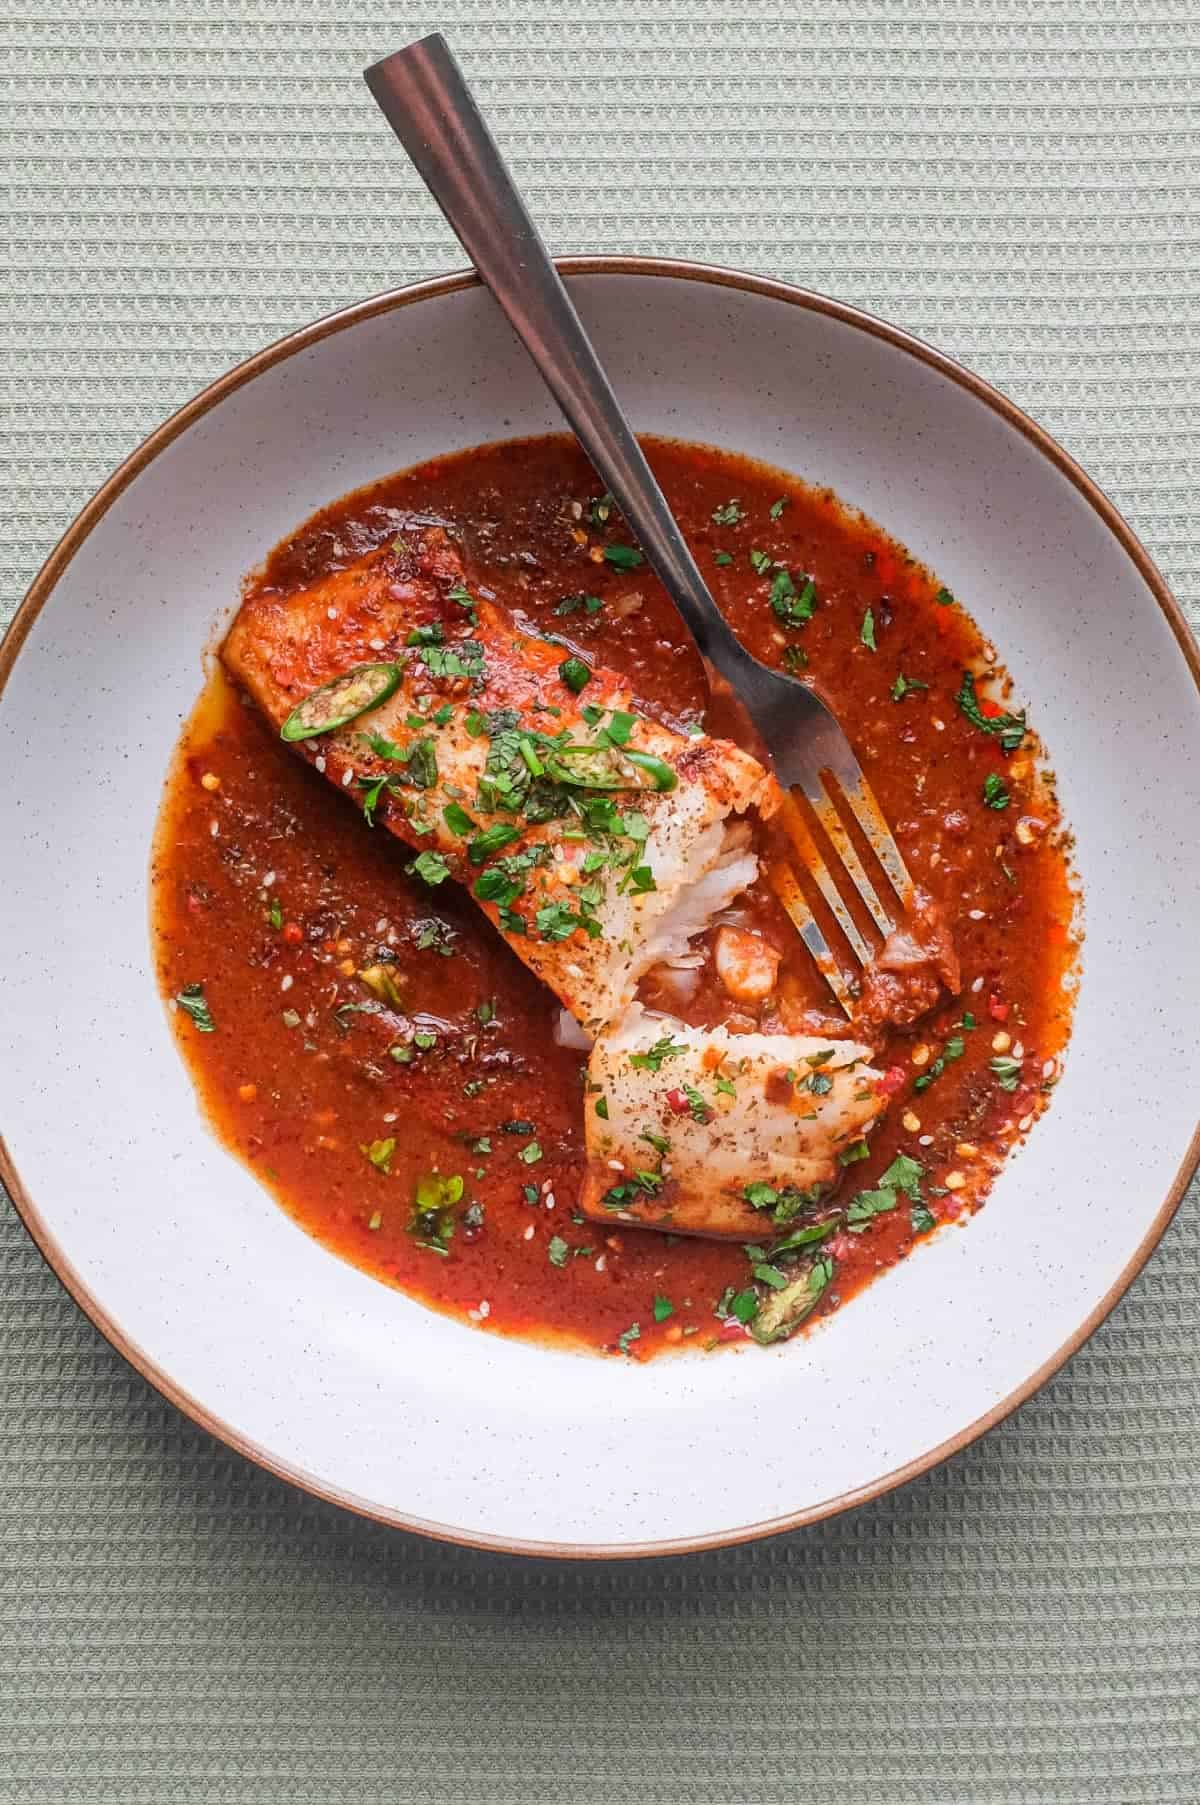 A fish fillet in a tomato Chraime sauce garnished with herbs and spices. A fork sits next to the fish